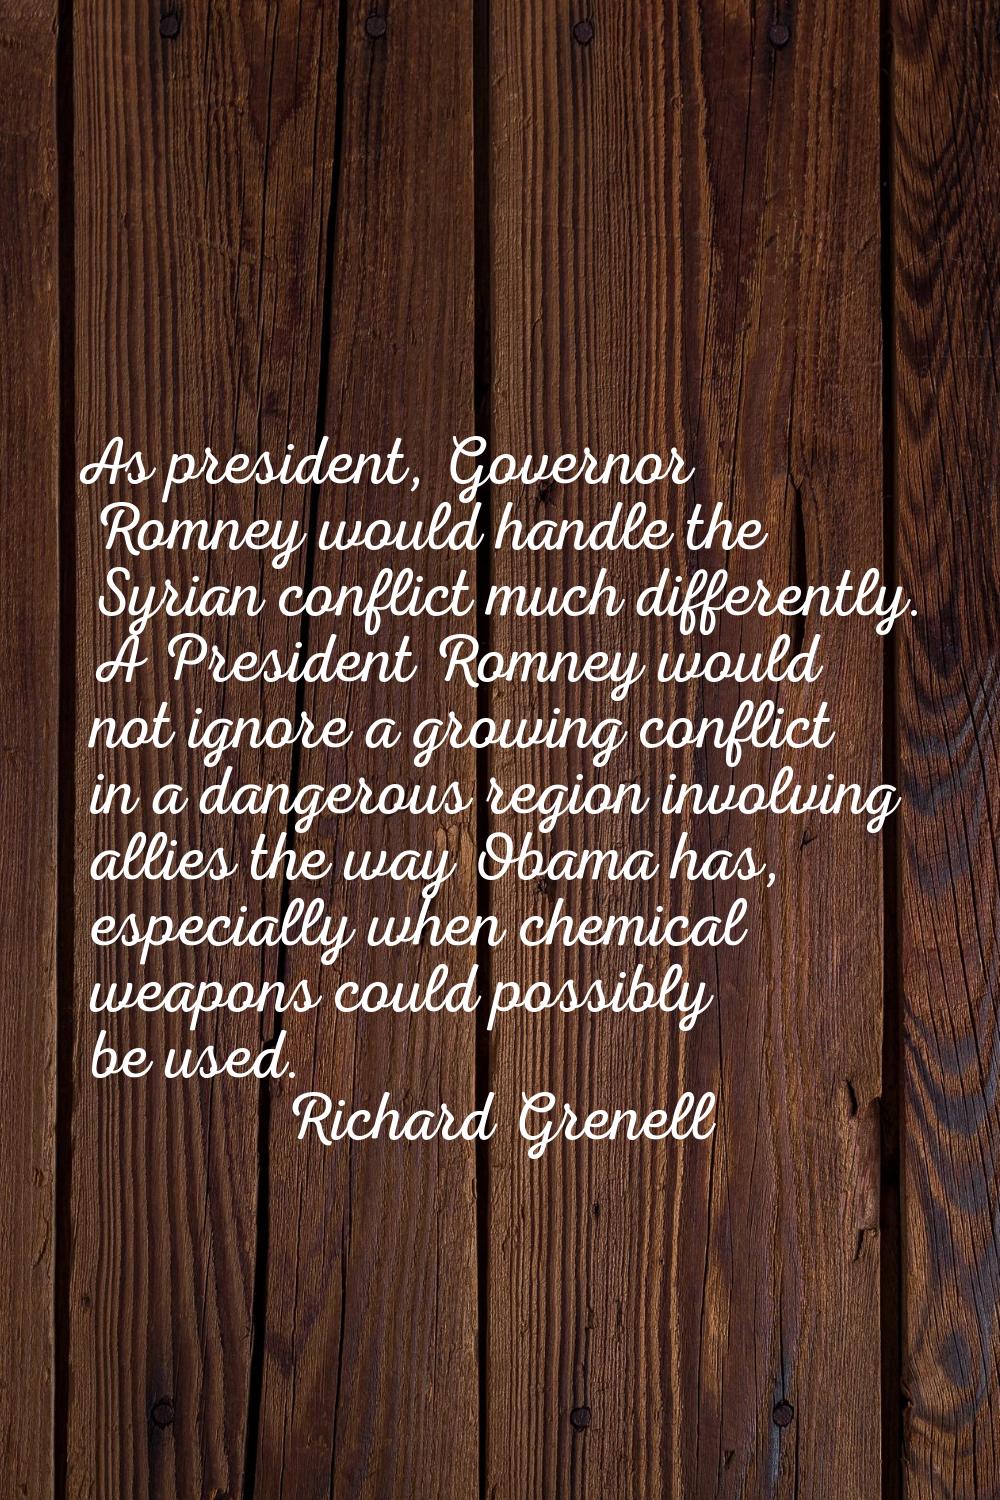 As president, Governor Romney would handle the Syrian conflict much differently. A President Romney